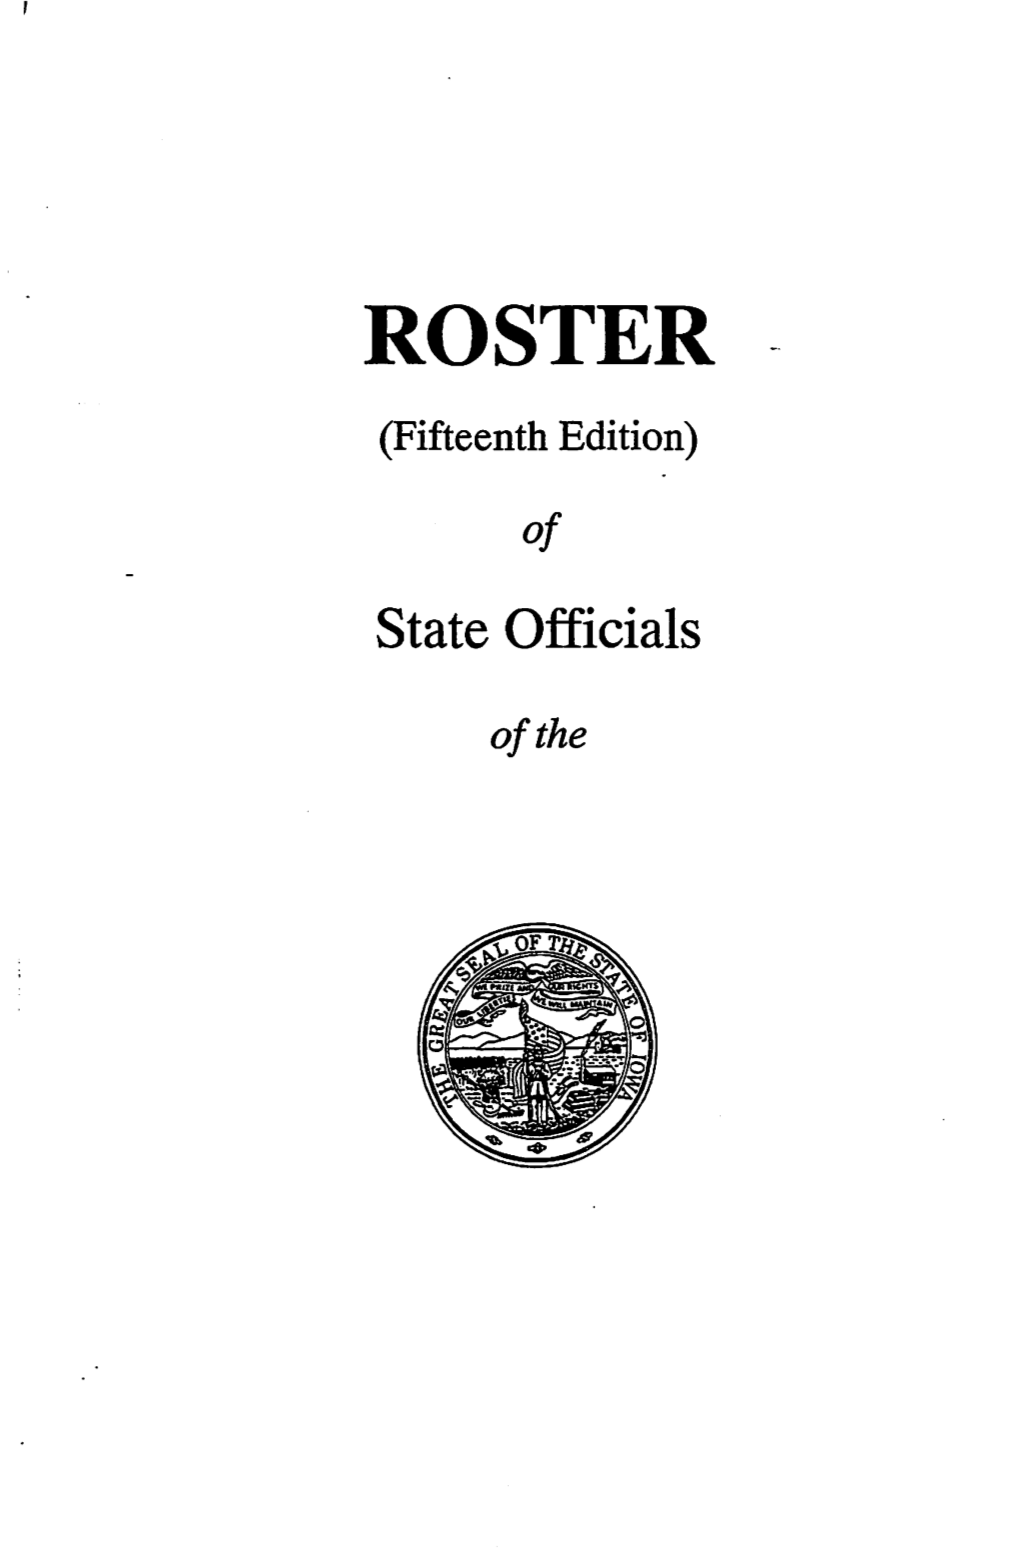 ROSTER - (Fifteenth Edition) of State ()Fficials